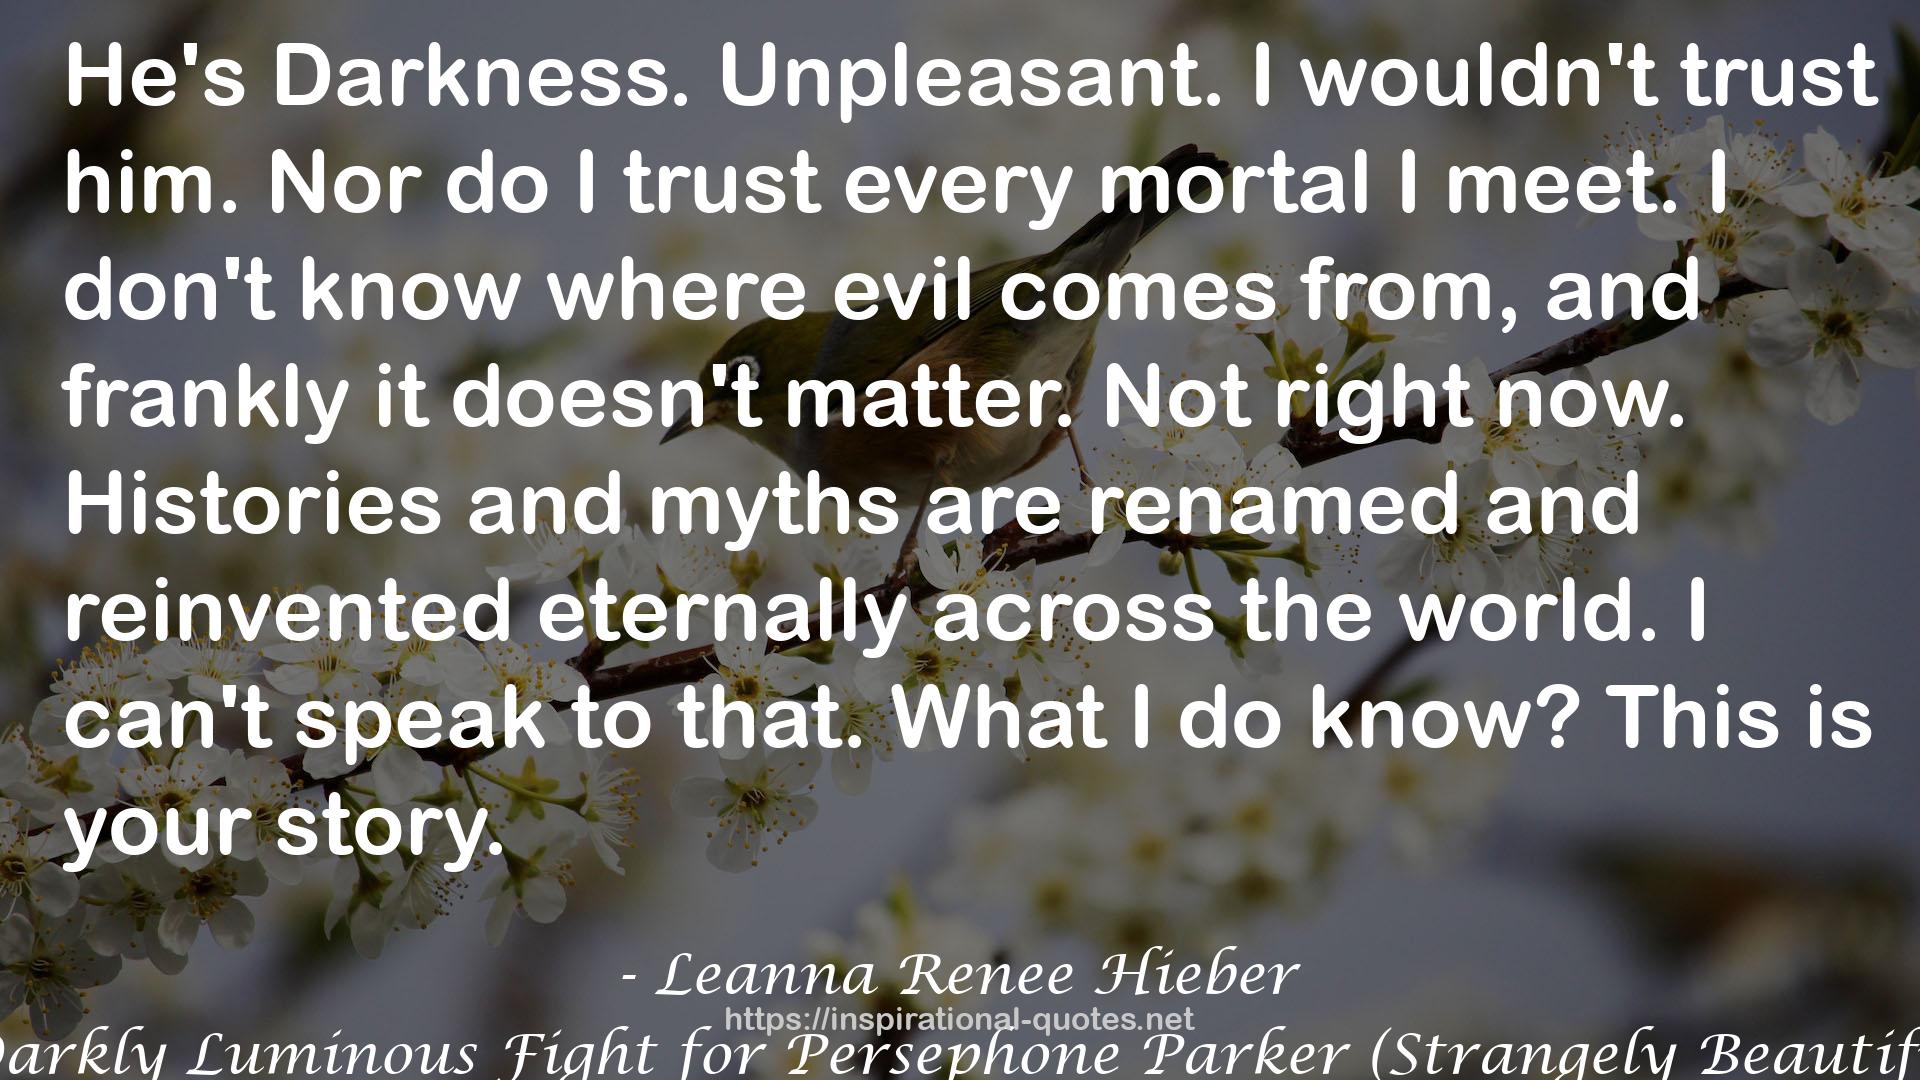 The Darkly Luminous Fight for Persephone Parker (Strangely Beautiful, #2) QUOTES